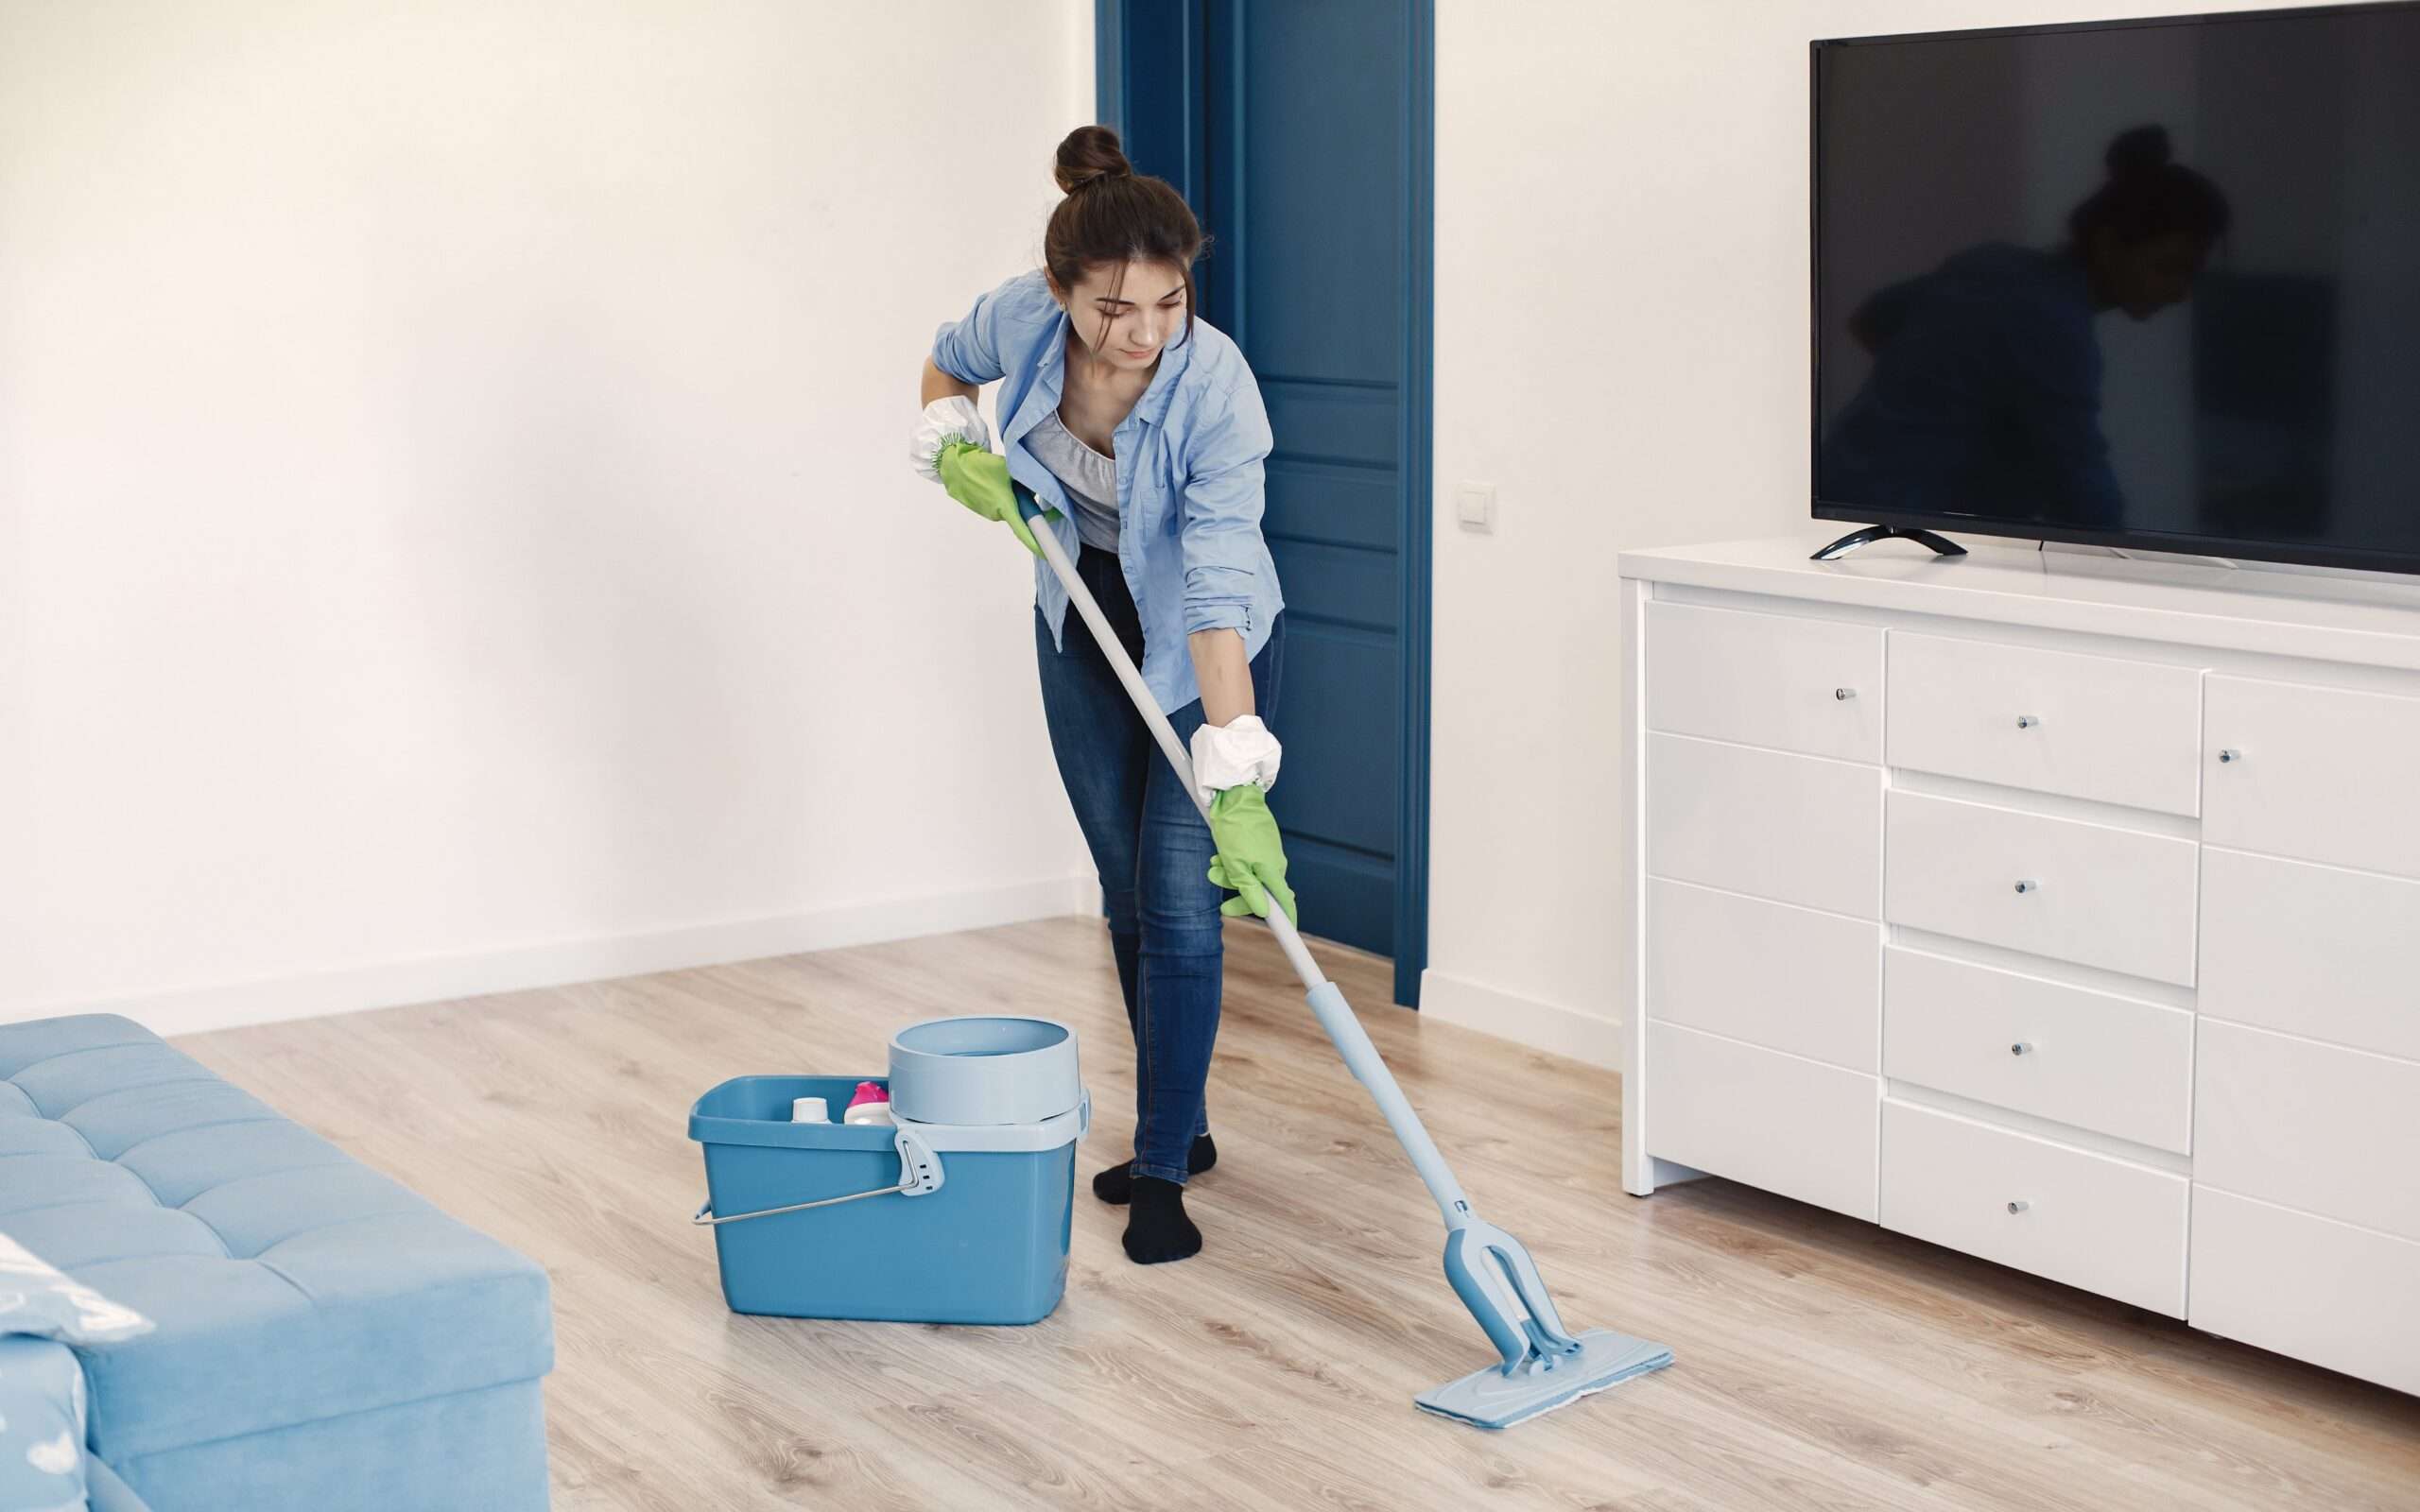 housewife woking home lady blue shirt woman clean floor min scaled